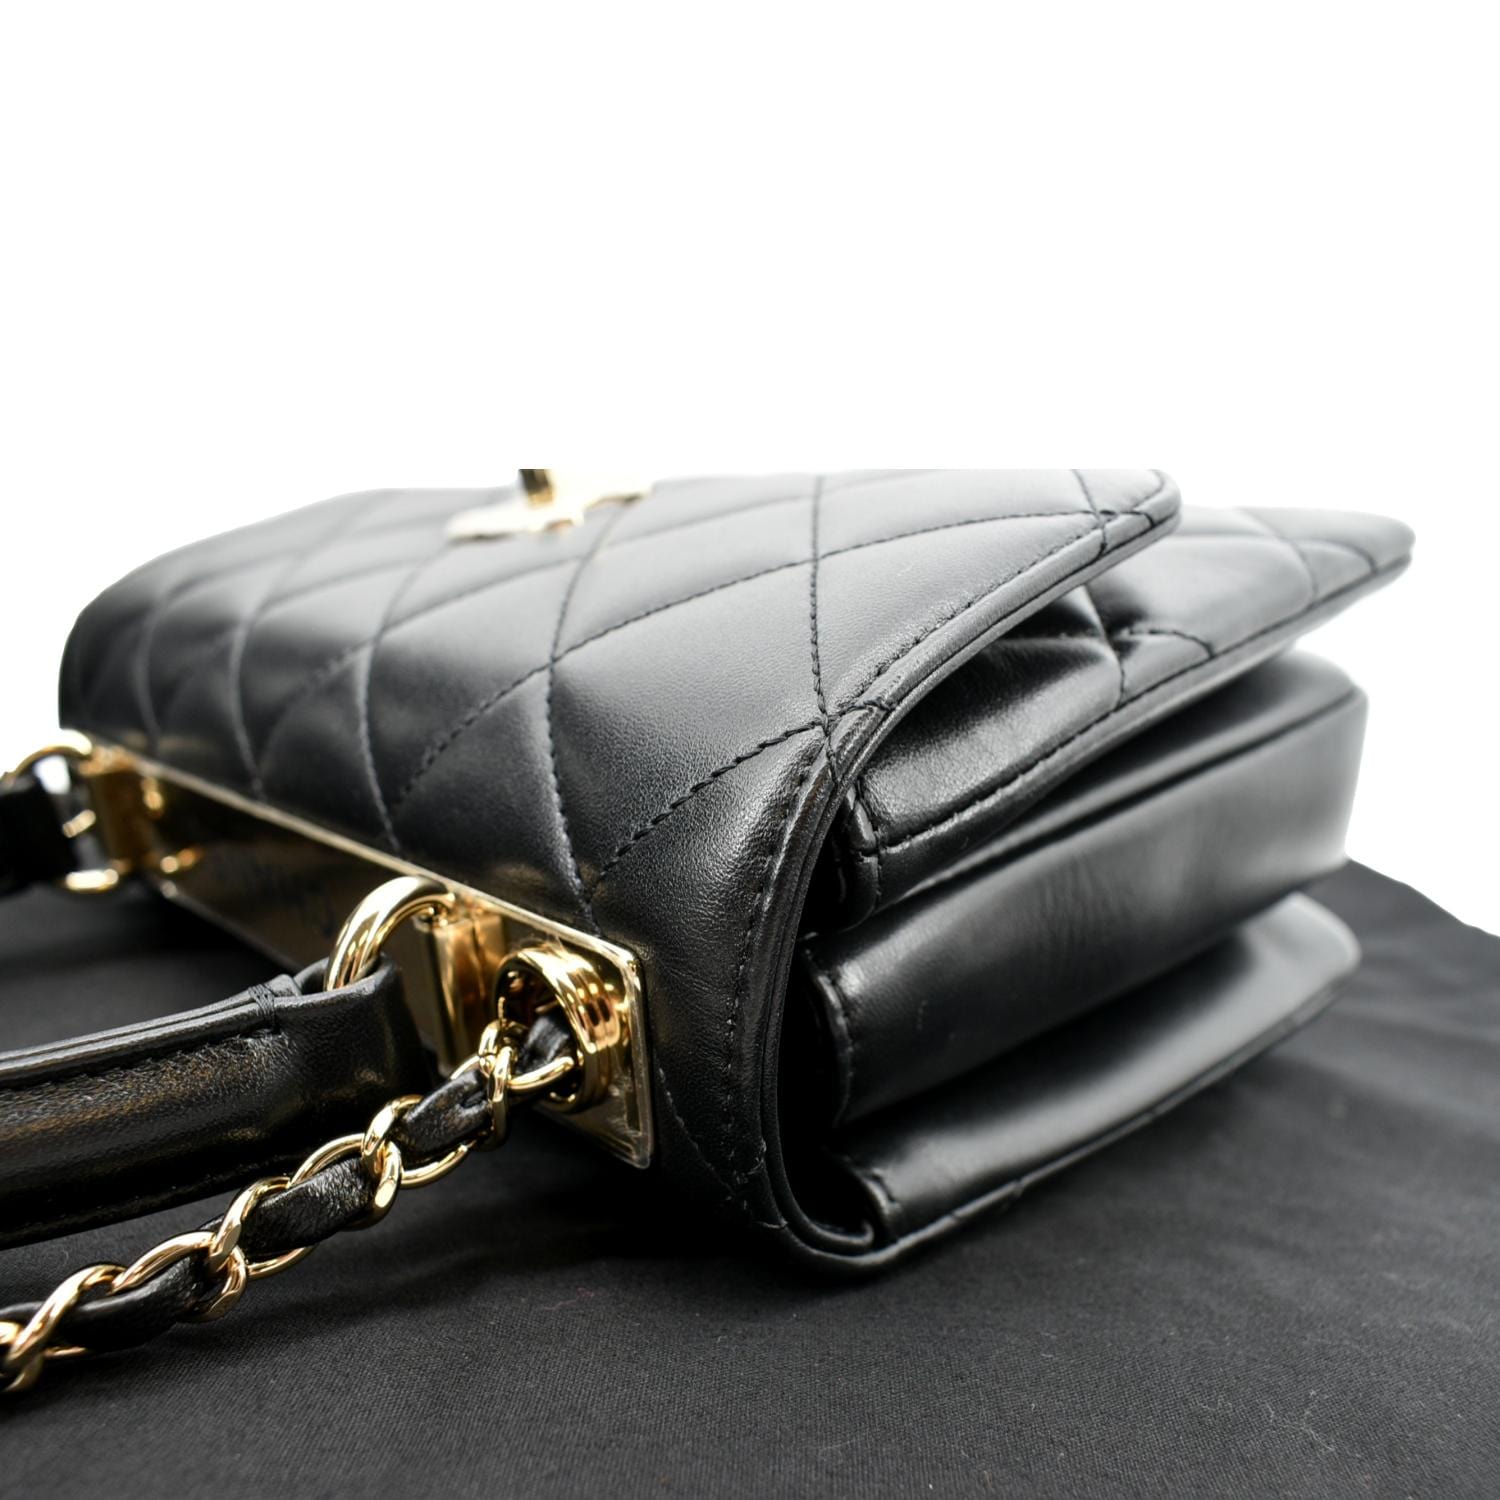 CHANEL, Bags, Chanellambskin Quilted Small Trendy Cc Dual Handle Flap Bag  Black 0authentic